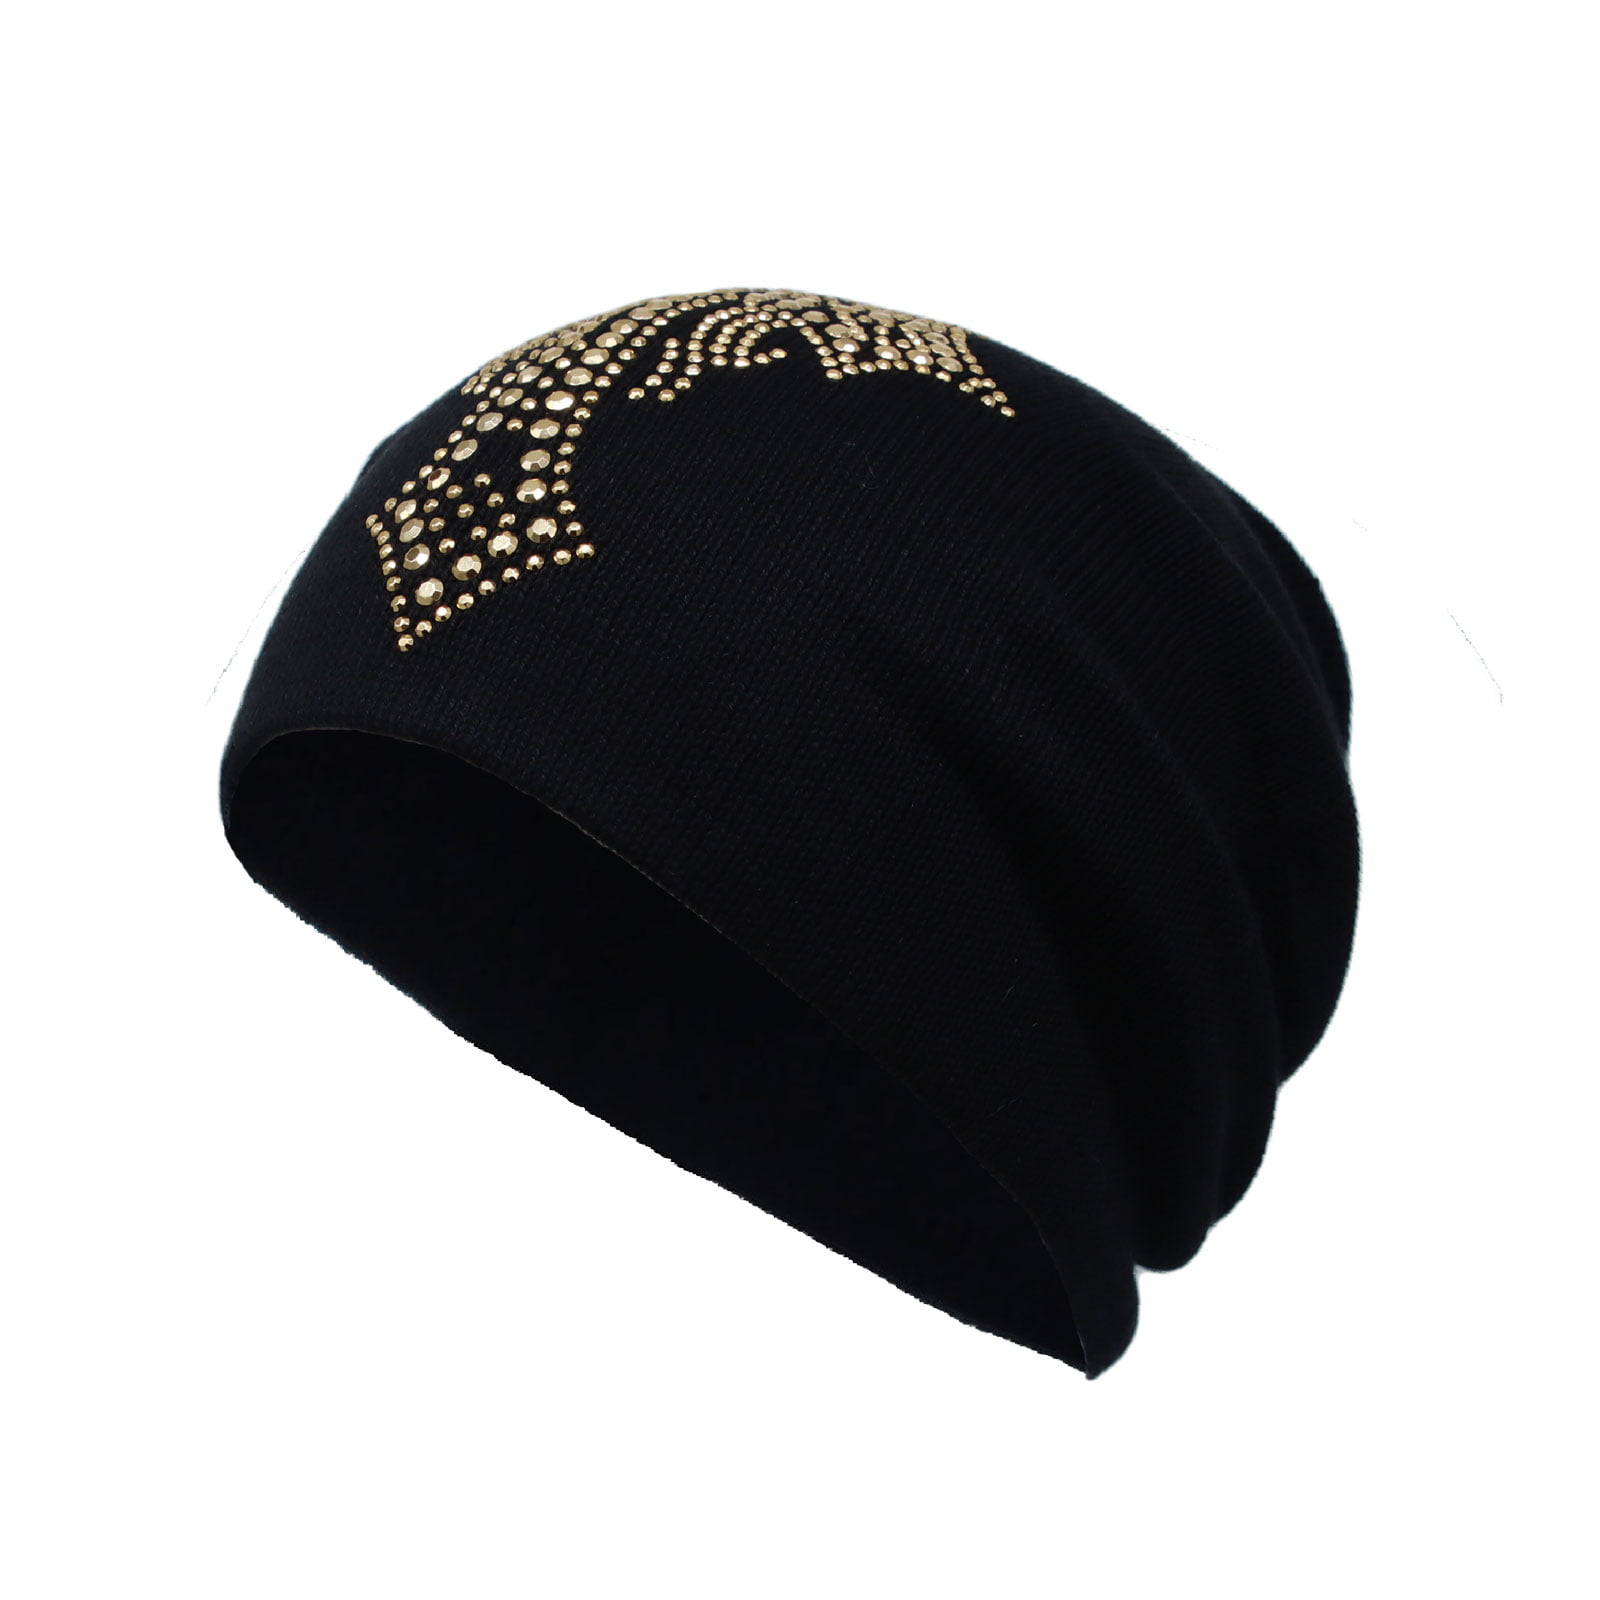 WITHMOONS Cross Rhinestone Knitted Beanie Hat Cotton Skull Cap YT51354  (Gold)